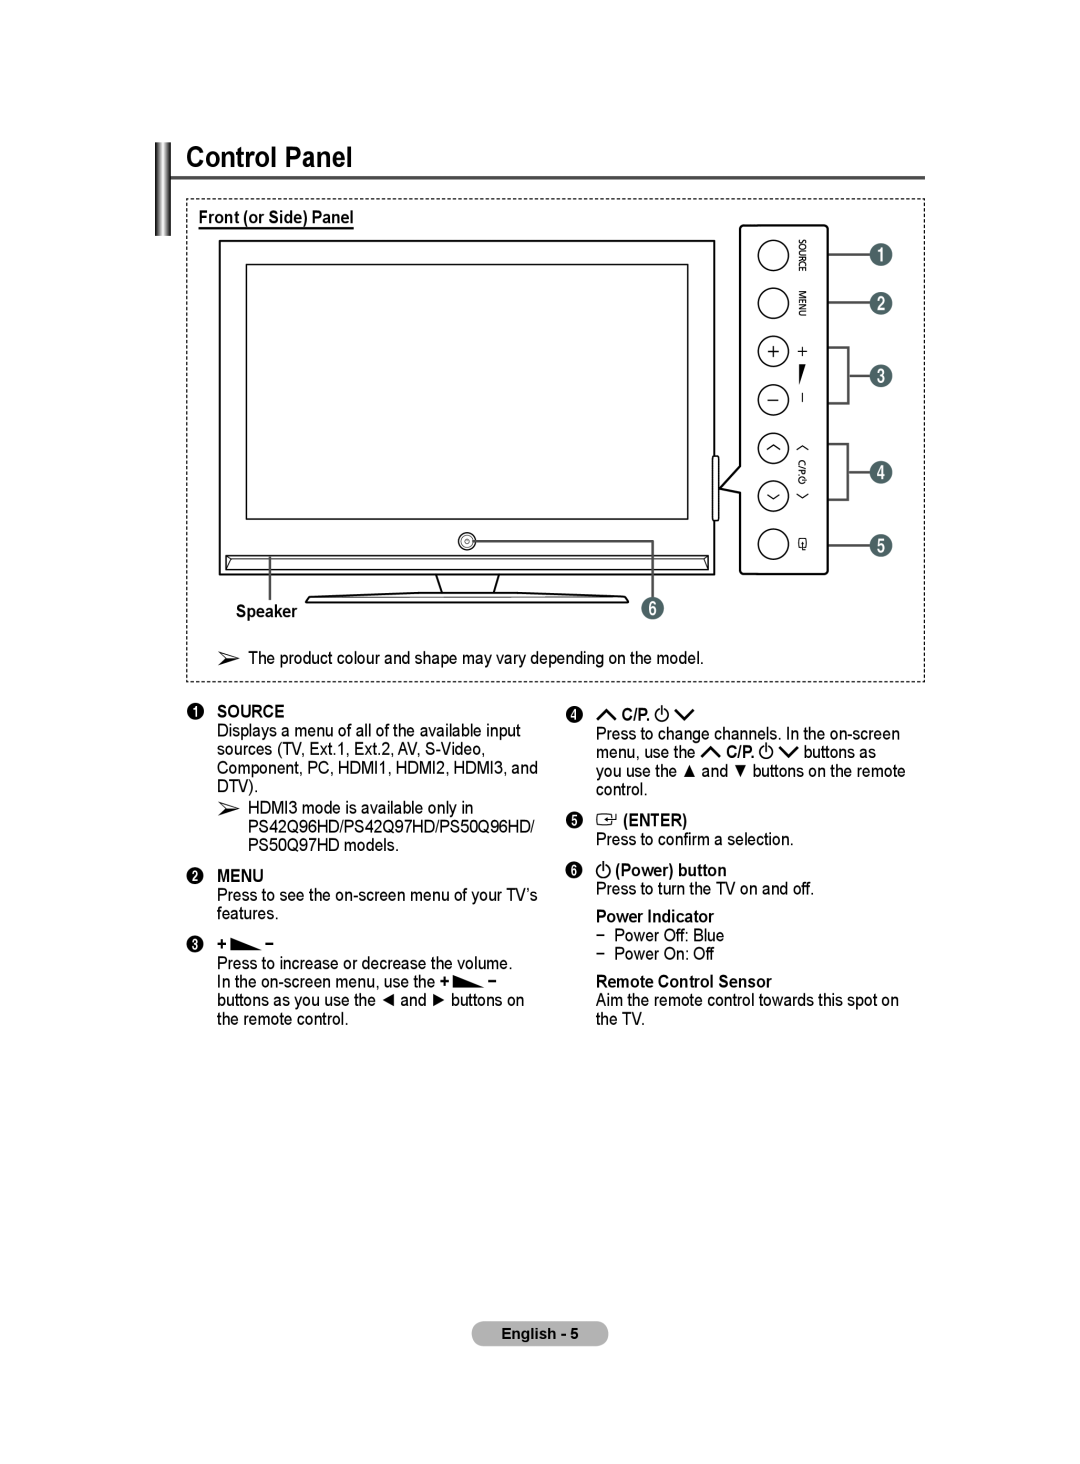 Samsung BN68-01171B-03 Control Panel, Front or Side Panel Speaker, 1SOURCE, 2MENU, 3+, menu, use the, buttons as, control 